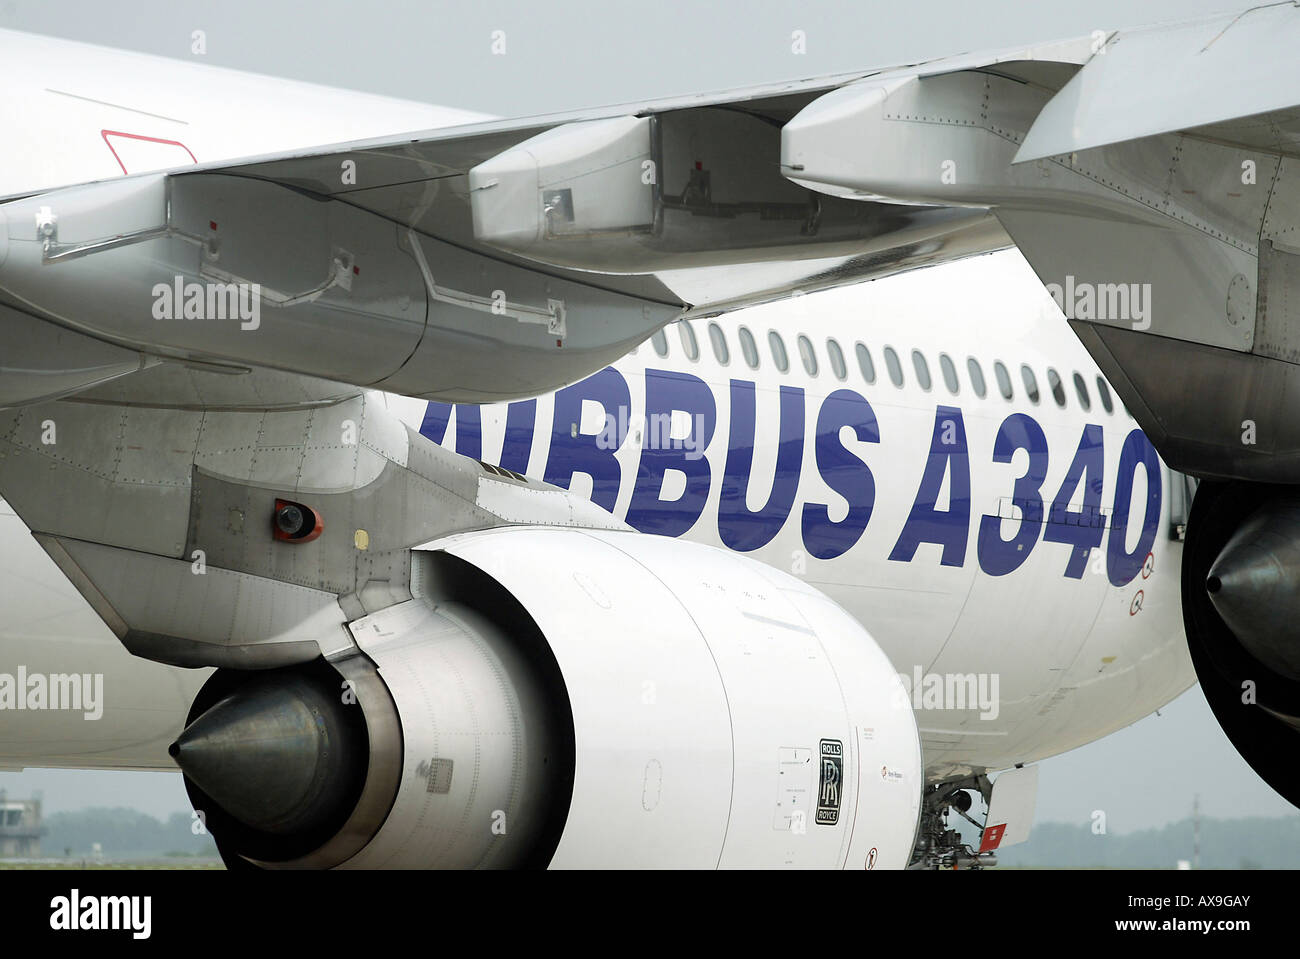 Airbus A340 at the International Aerospace Exhibition in Berlin, Germany Stock Photo